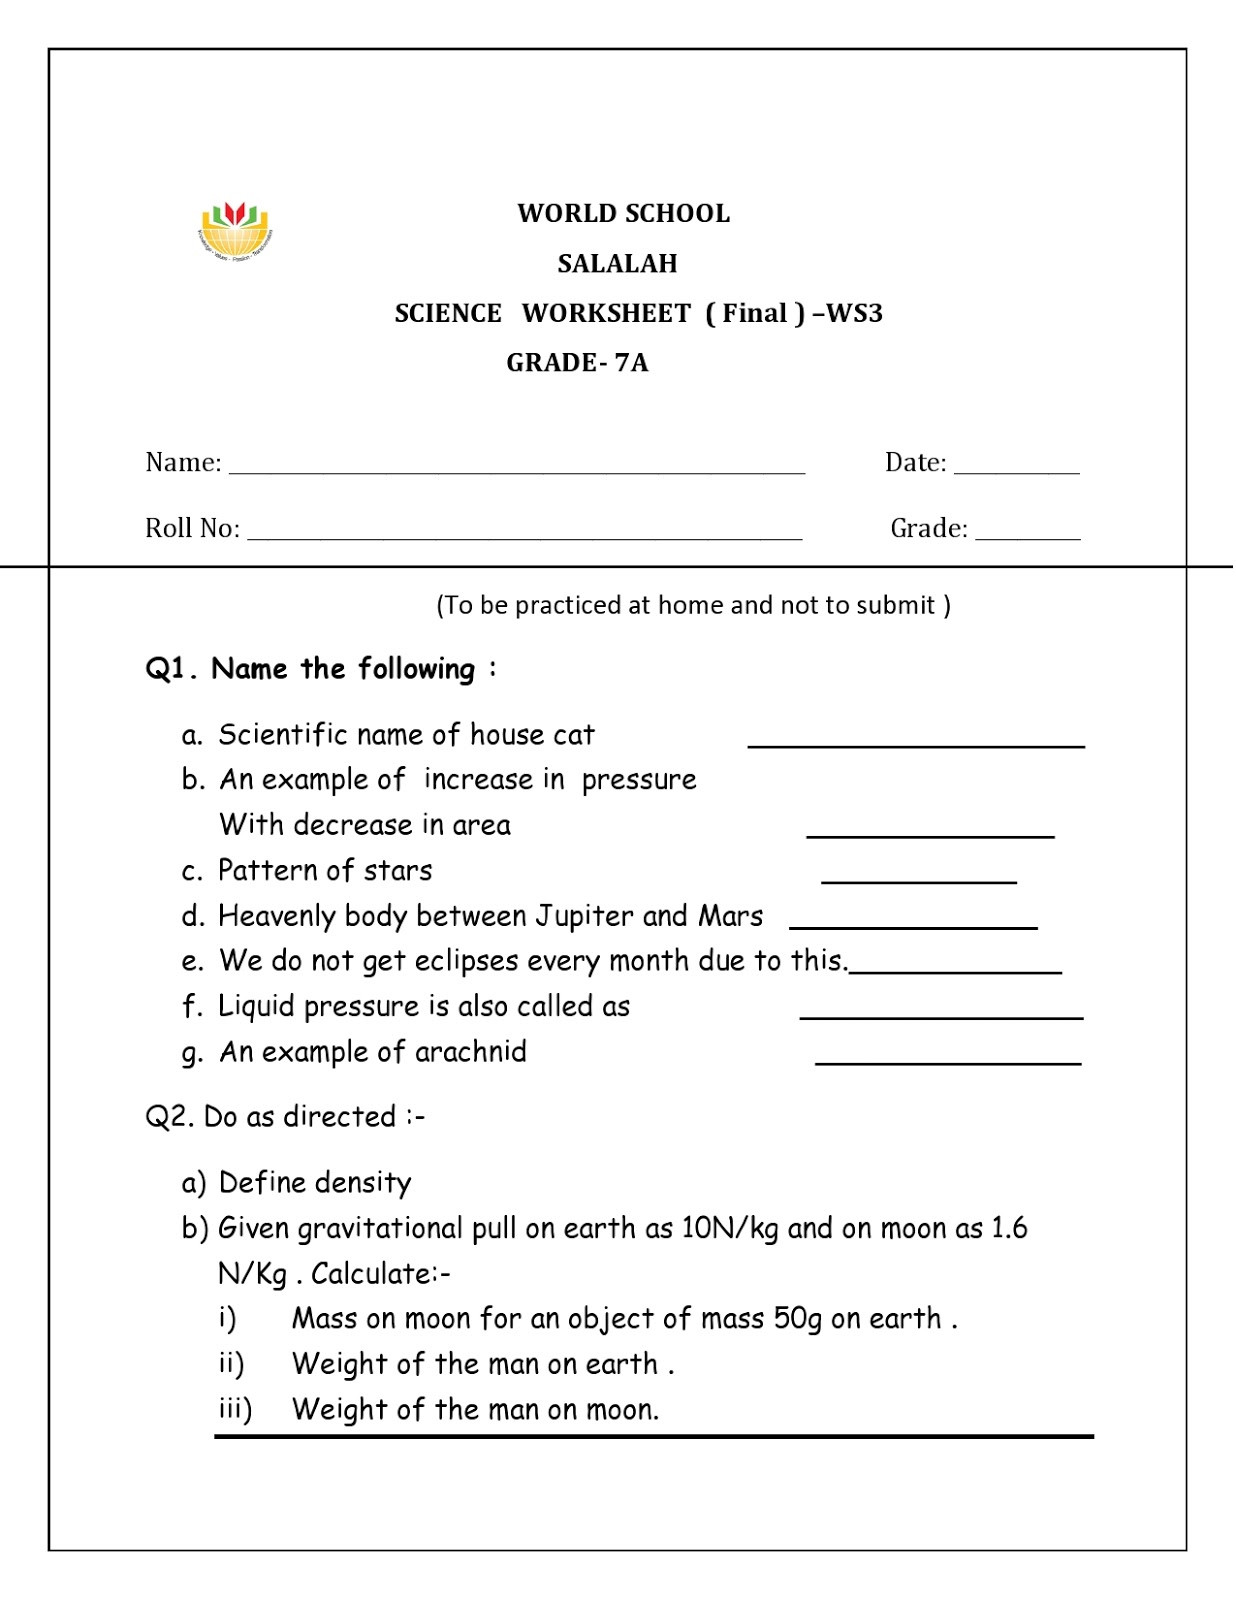 Mass and Weight Worksheet World School Homework for Grade as Science Worksheets